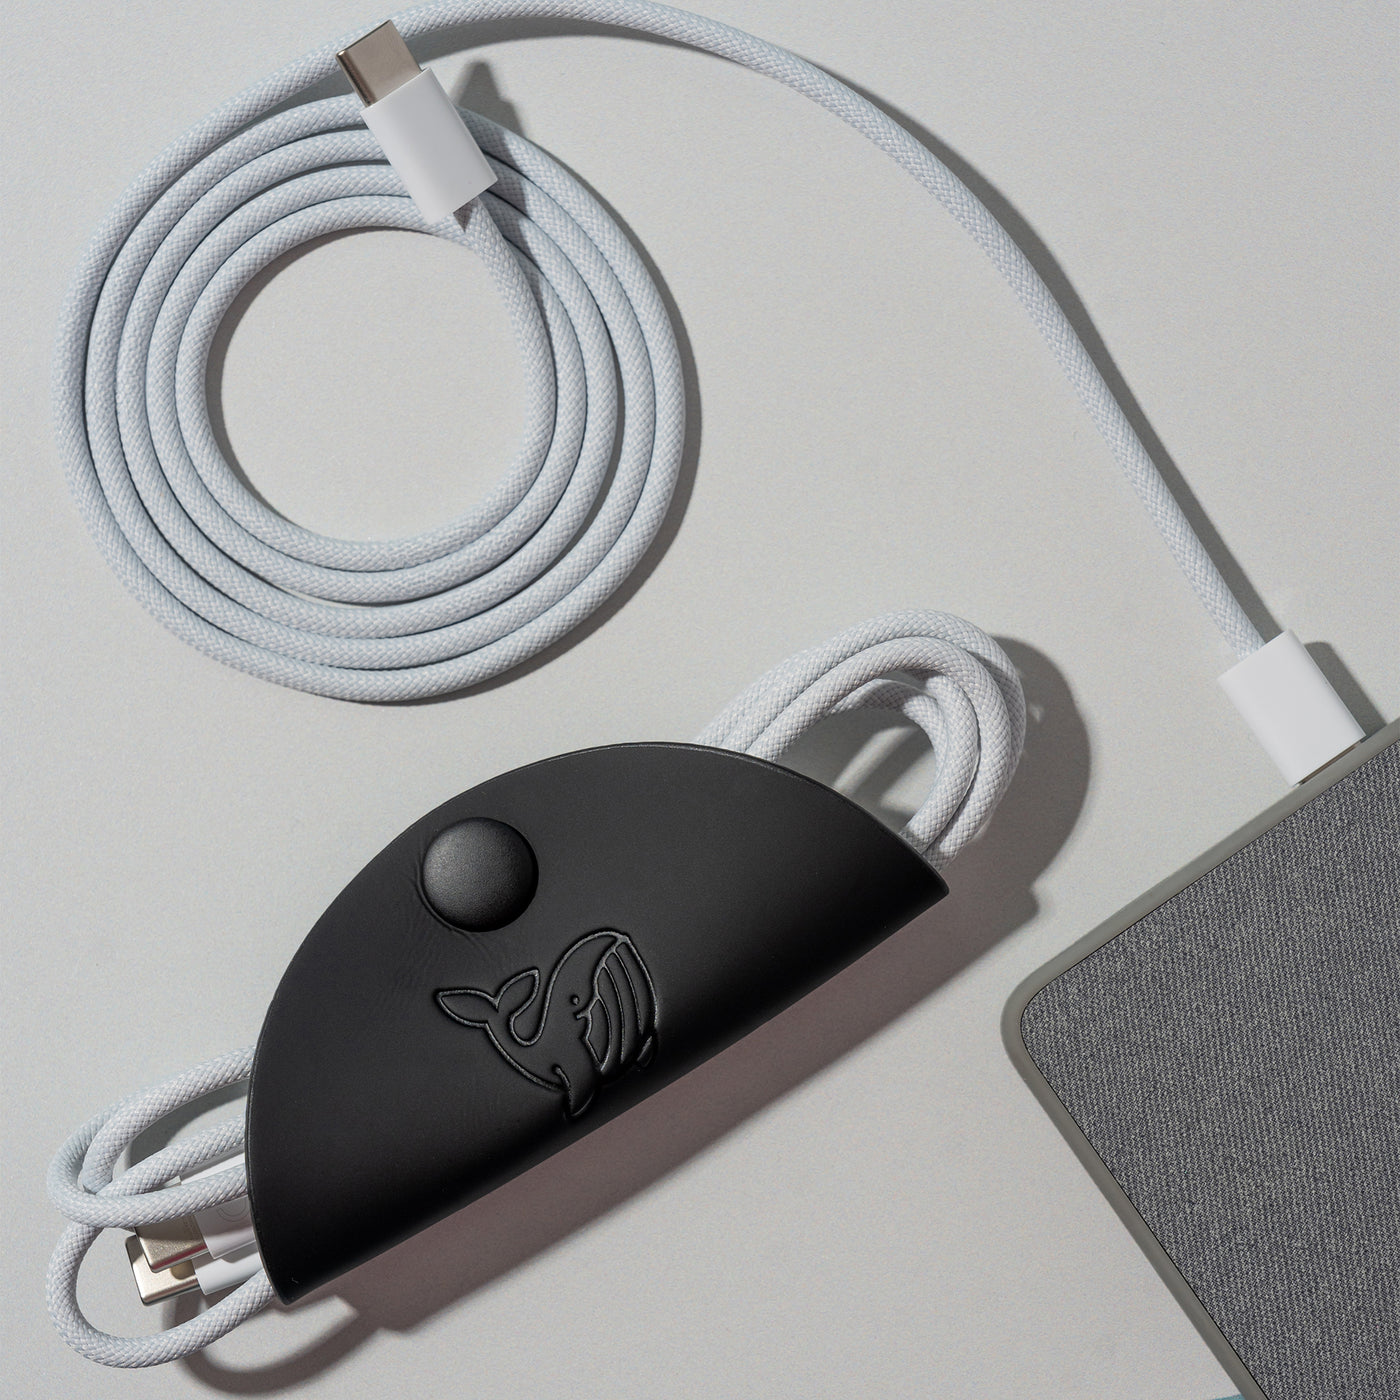 A black OneNine5 cable tidy, with a 1 metre Apple USB-C wire coiled inside. Next to this is a grey power bank and a coiled white charging cable, on a a white background.